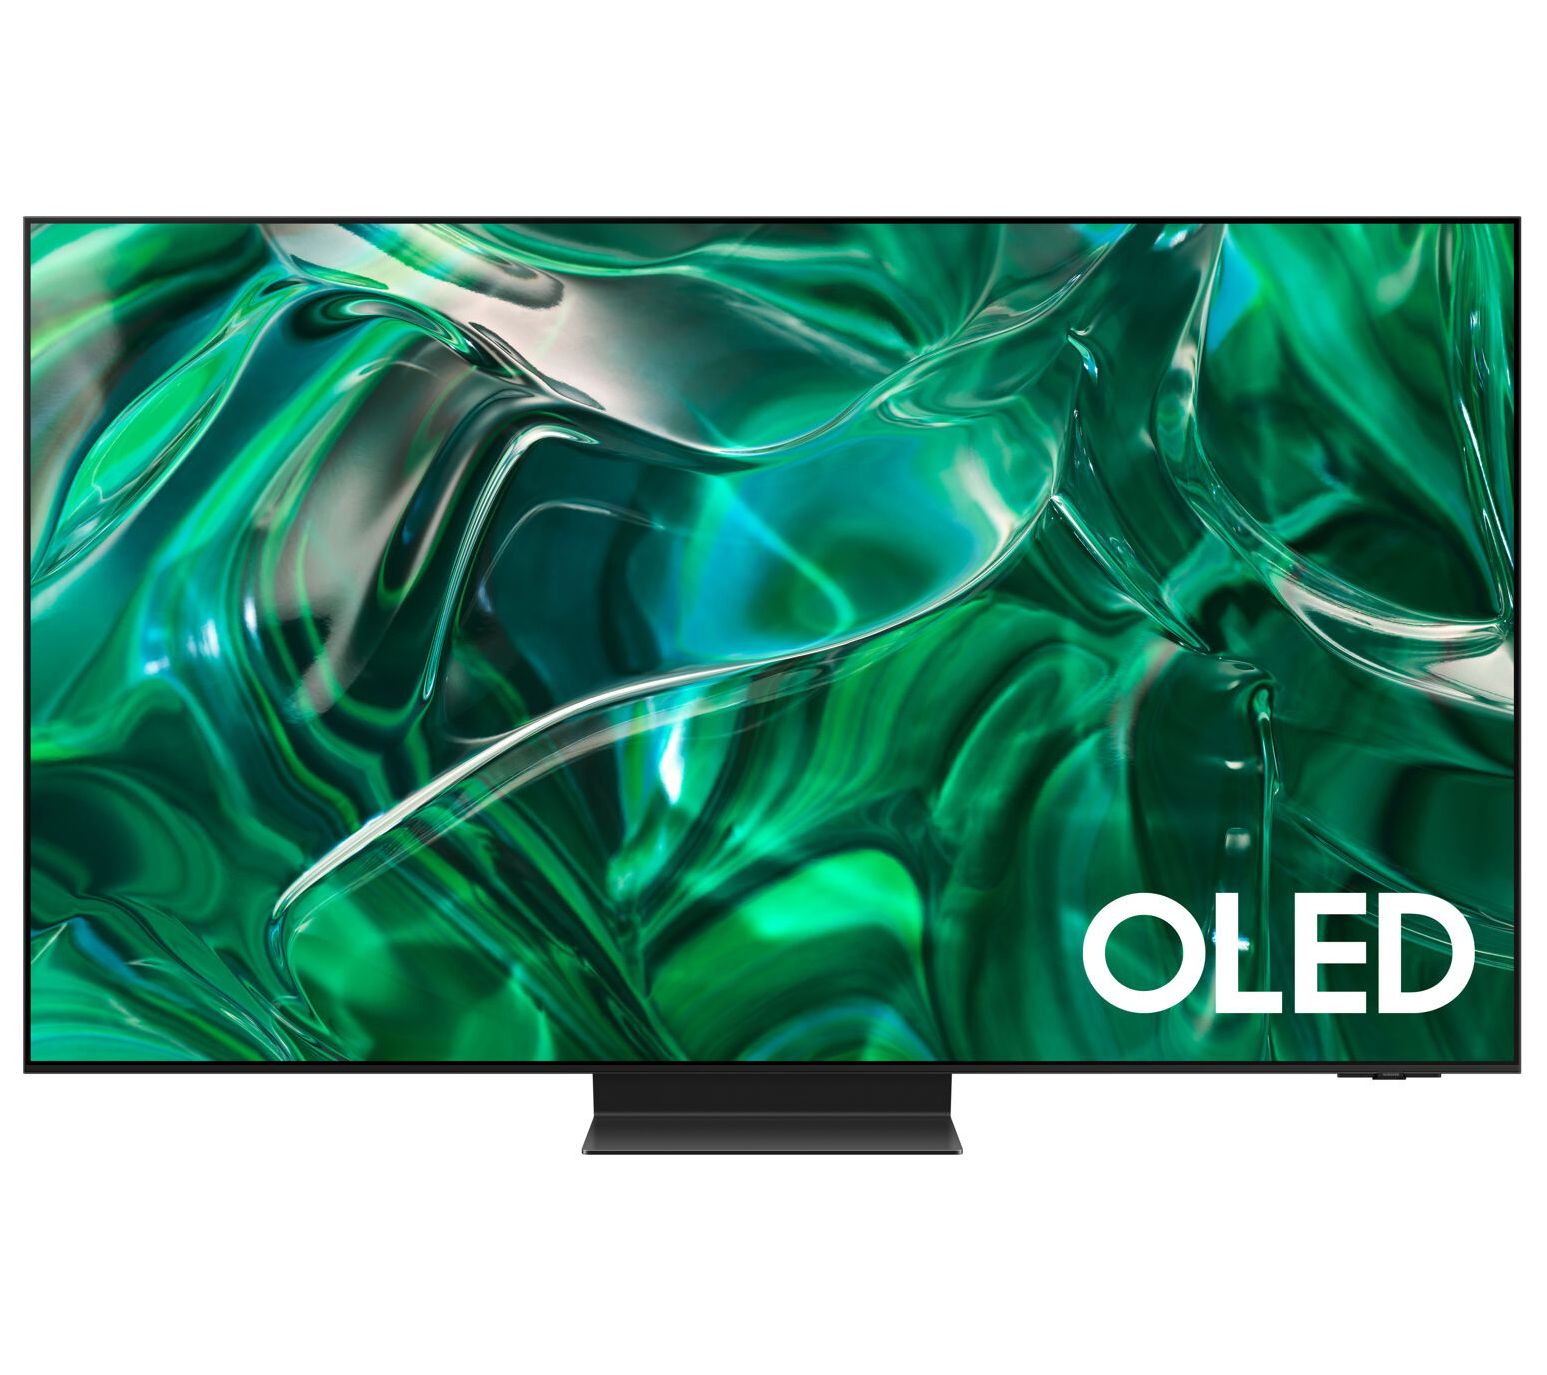 Will HDR kill your OLED TV?